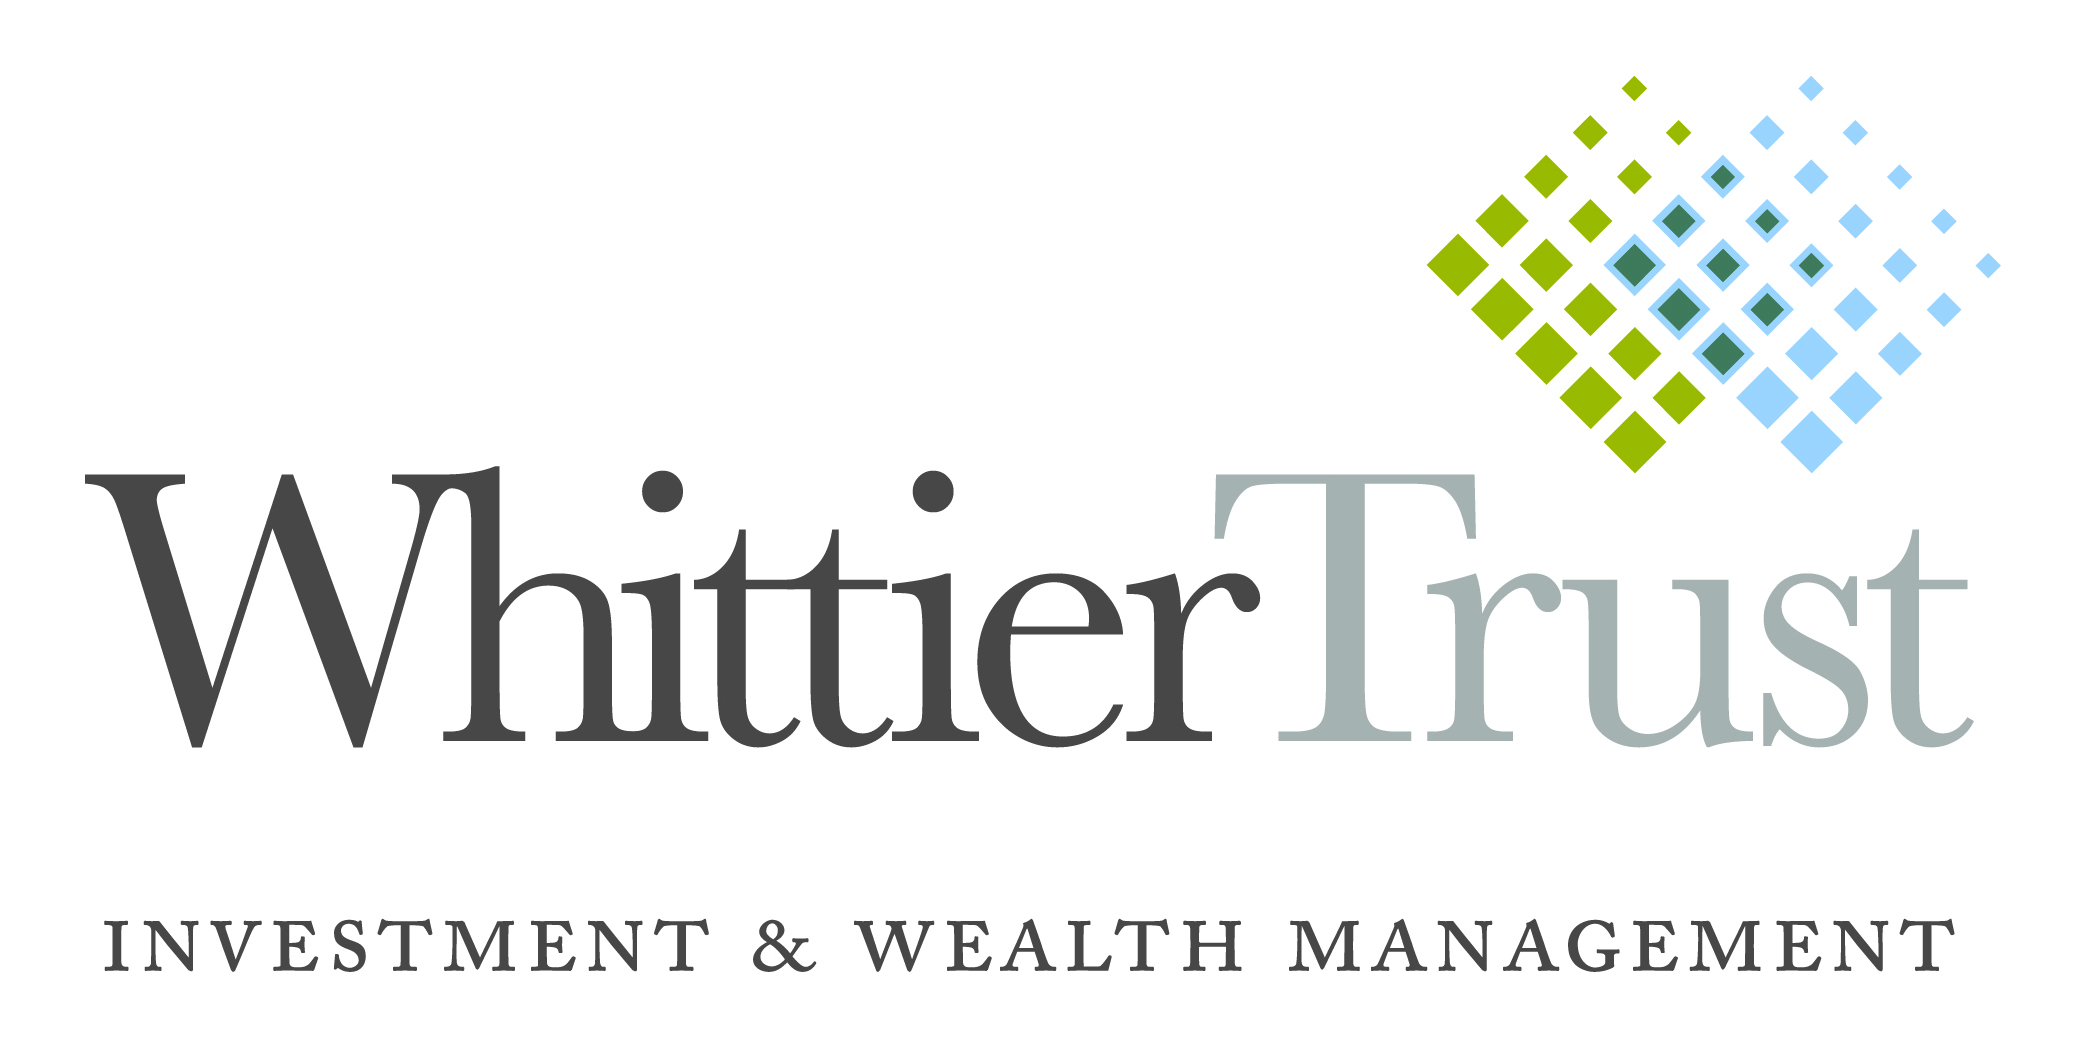 The Whittier Trust Company of Nevada, Inc. (WTC-NV), an independent wealth management company serving high-net-worth families, individuals and foundations across the United States, announced the opening of its first office in Oregon.